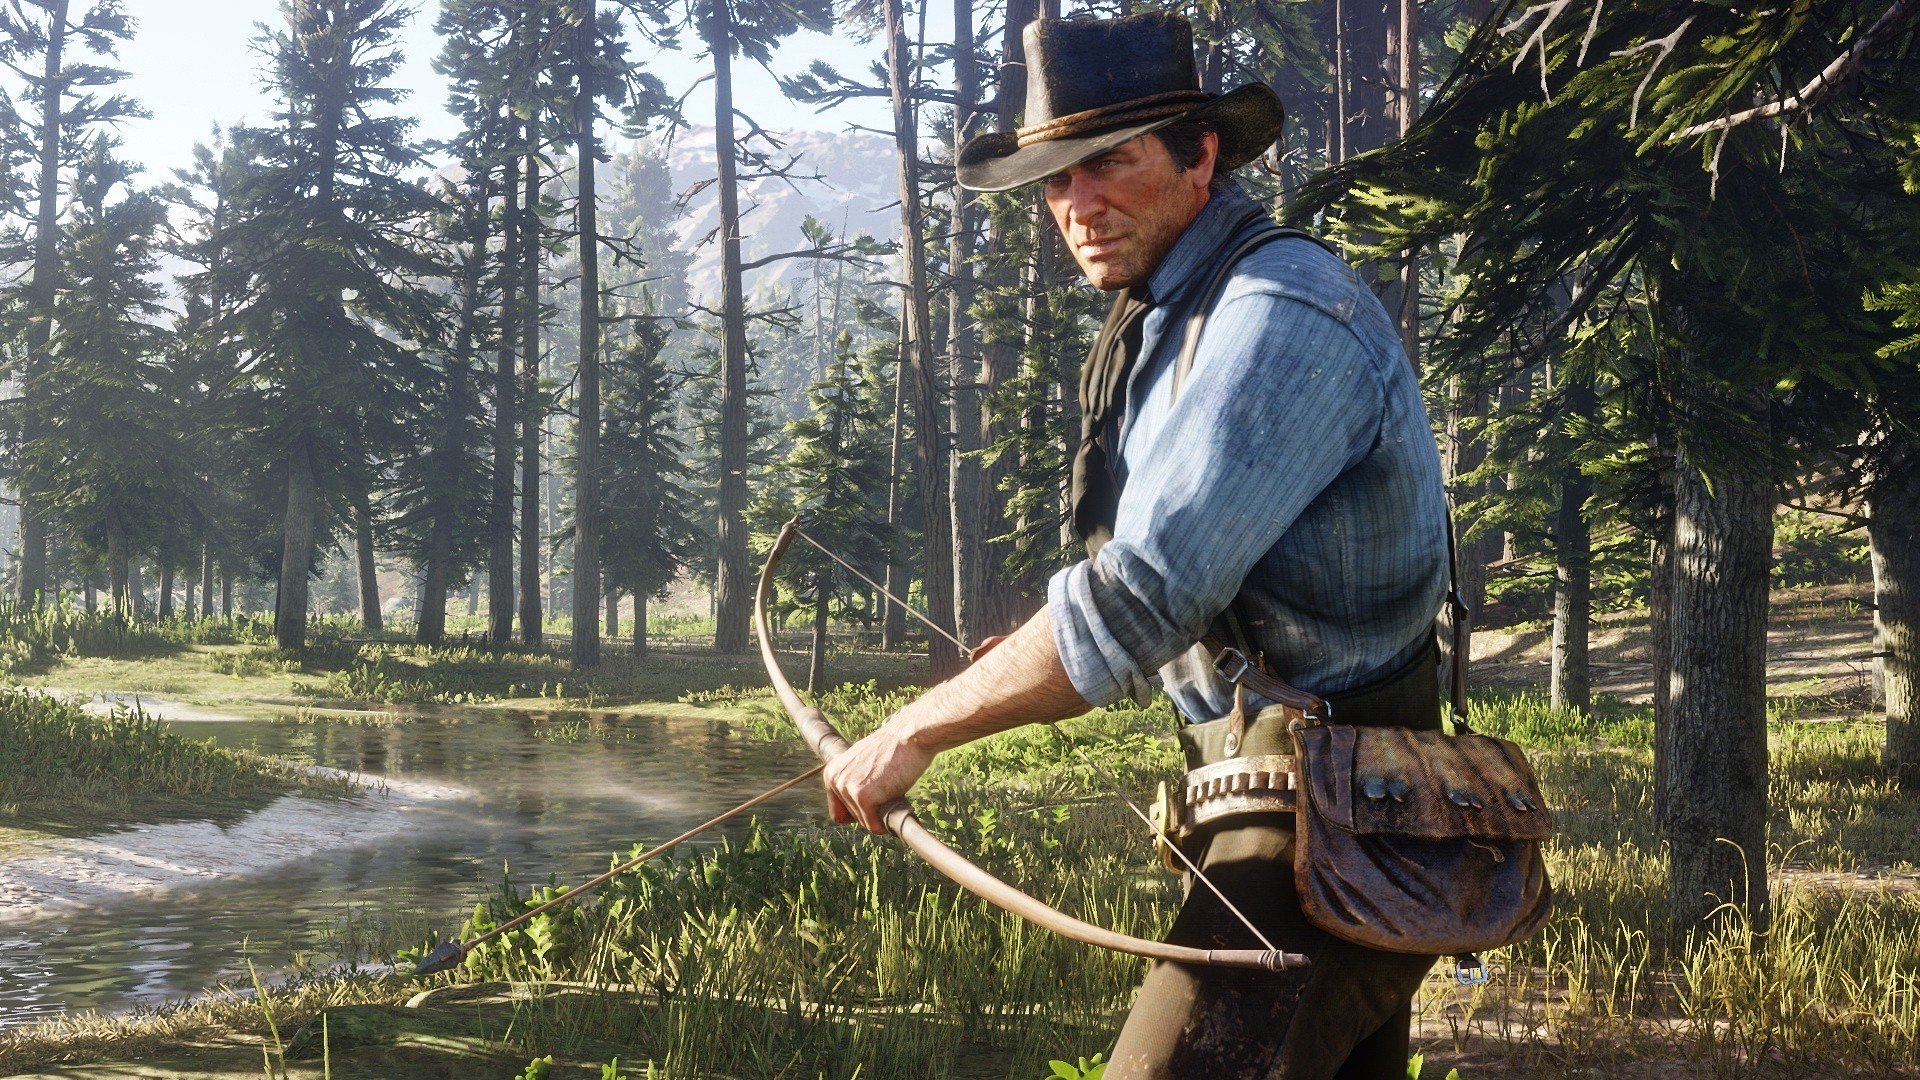 Dragon Zone - Red Dead Redemption 2 PC Game (Cracked) - 7827000 Size : 105  GB Price 110 RF Arthur Morgan and the Van der Linde gang are outlaws on the  run.